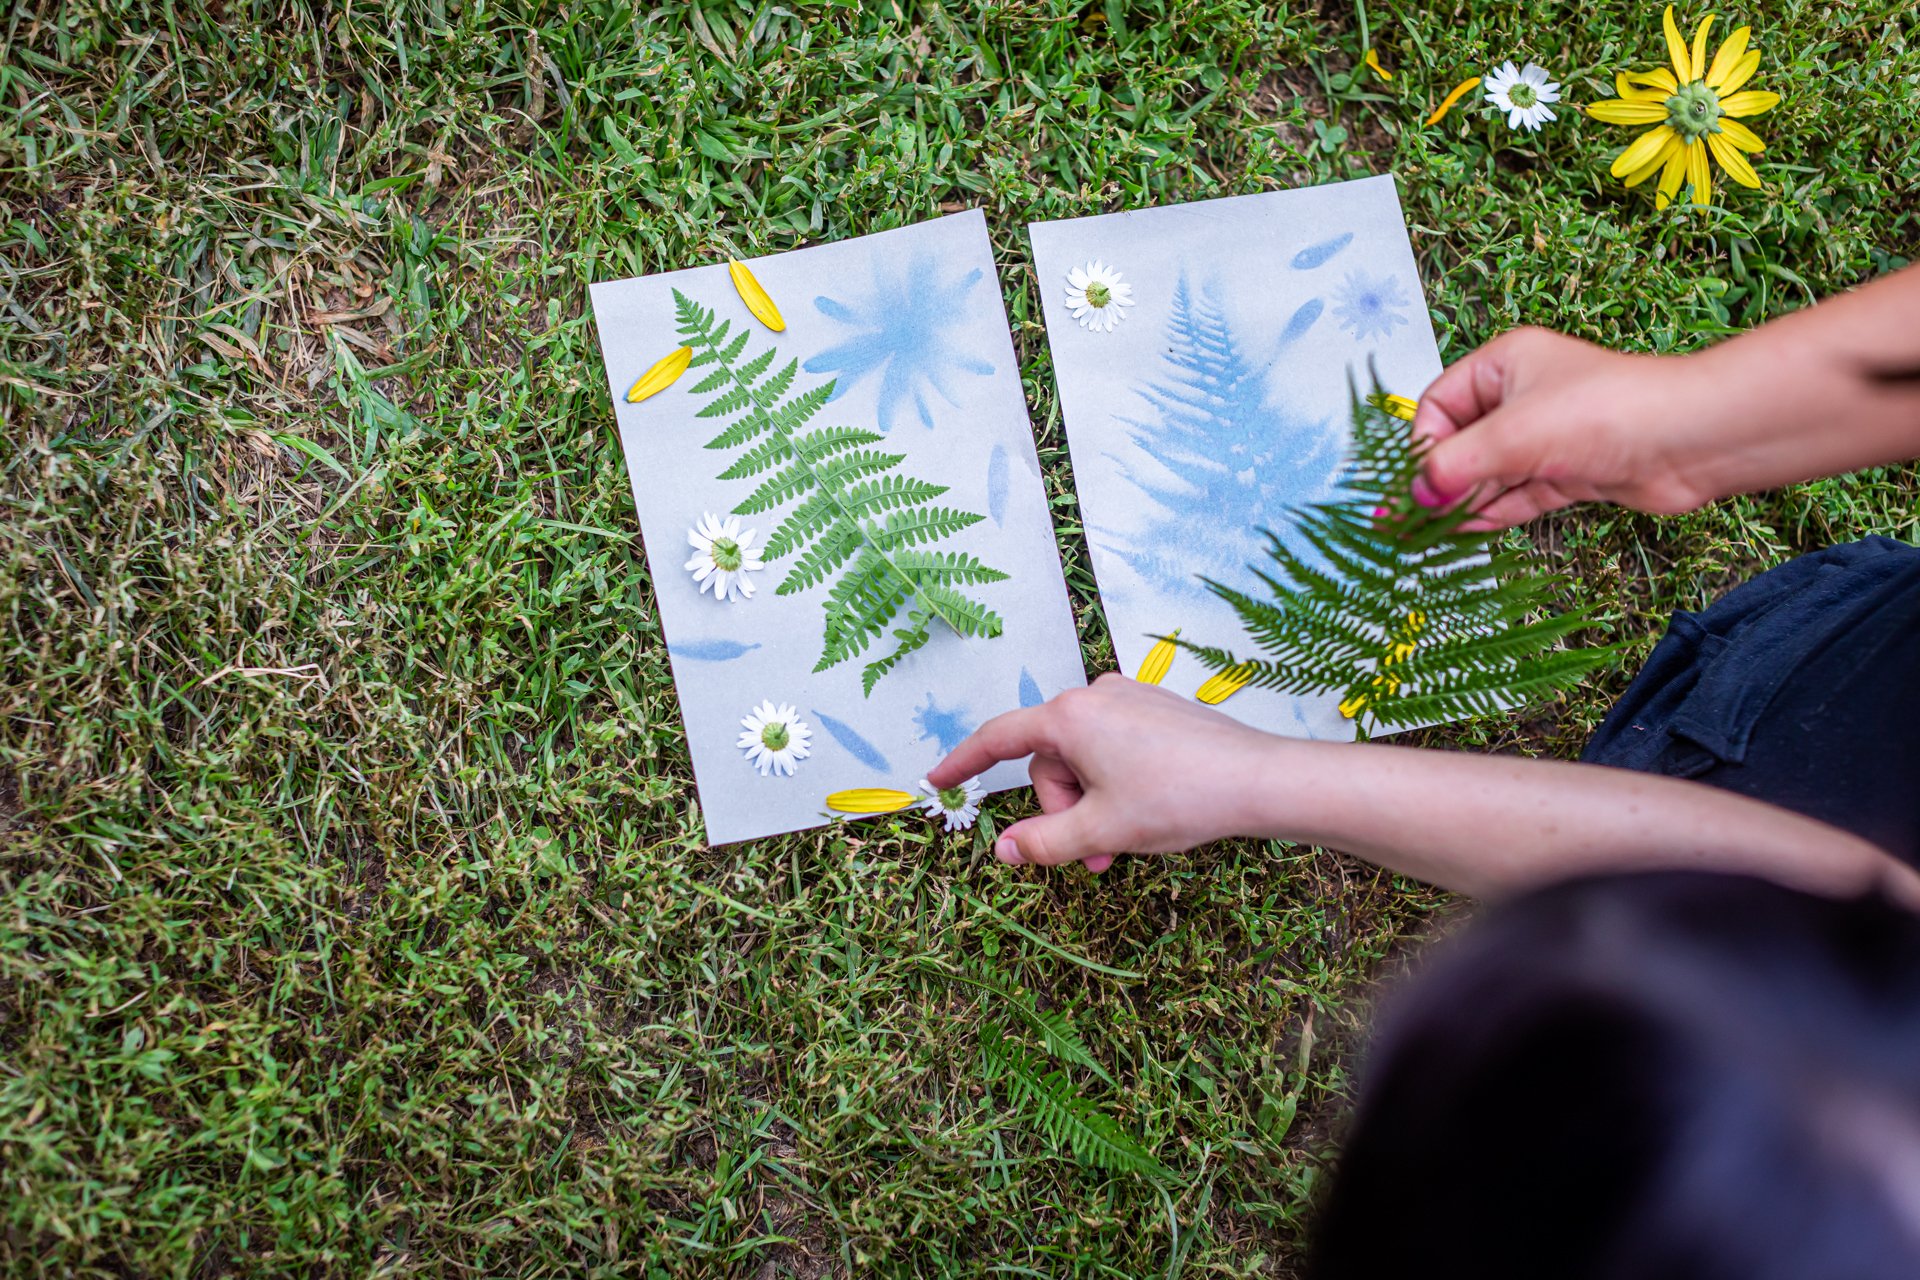 Campers use solar print paper and ferns, flowers, and leaves to make nature art at Arcadia Nature Camp